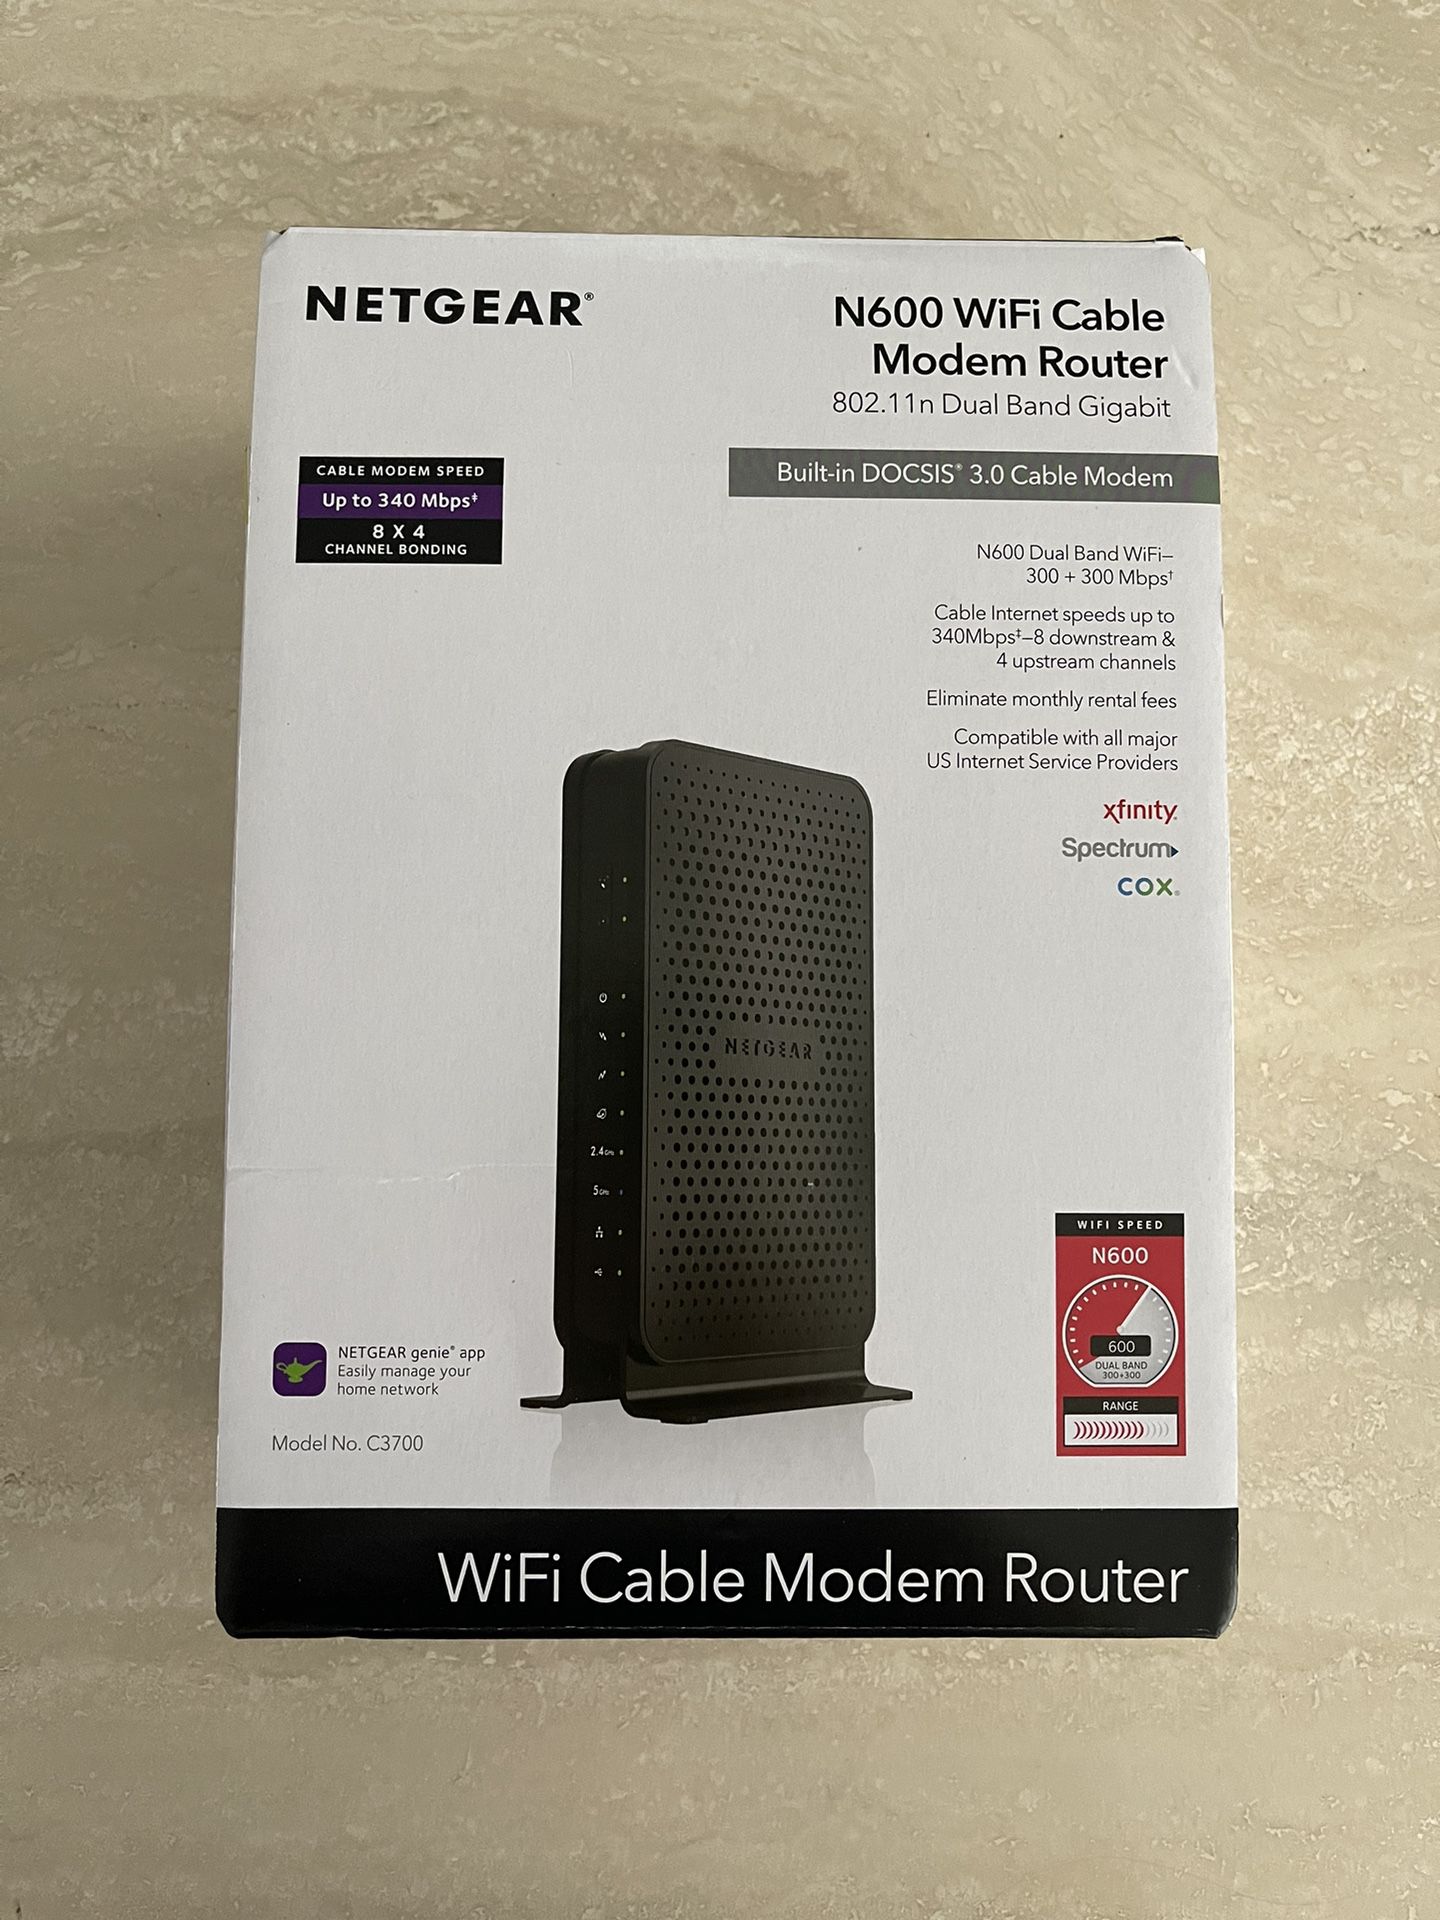 NETGEAR N600 WI-FI CABLE MODEM ROUTER 